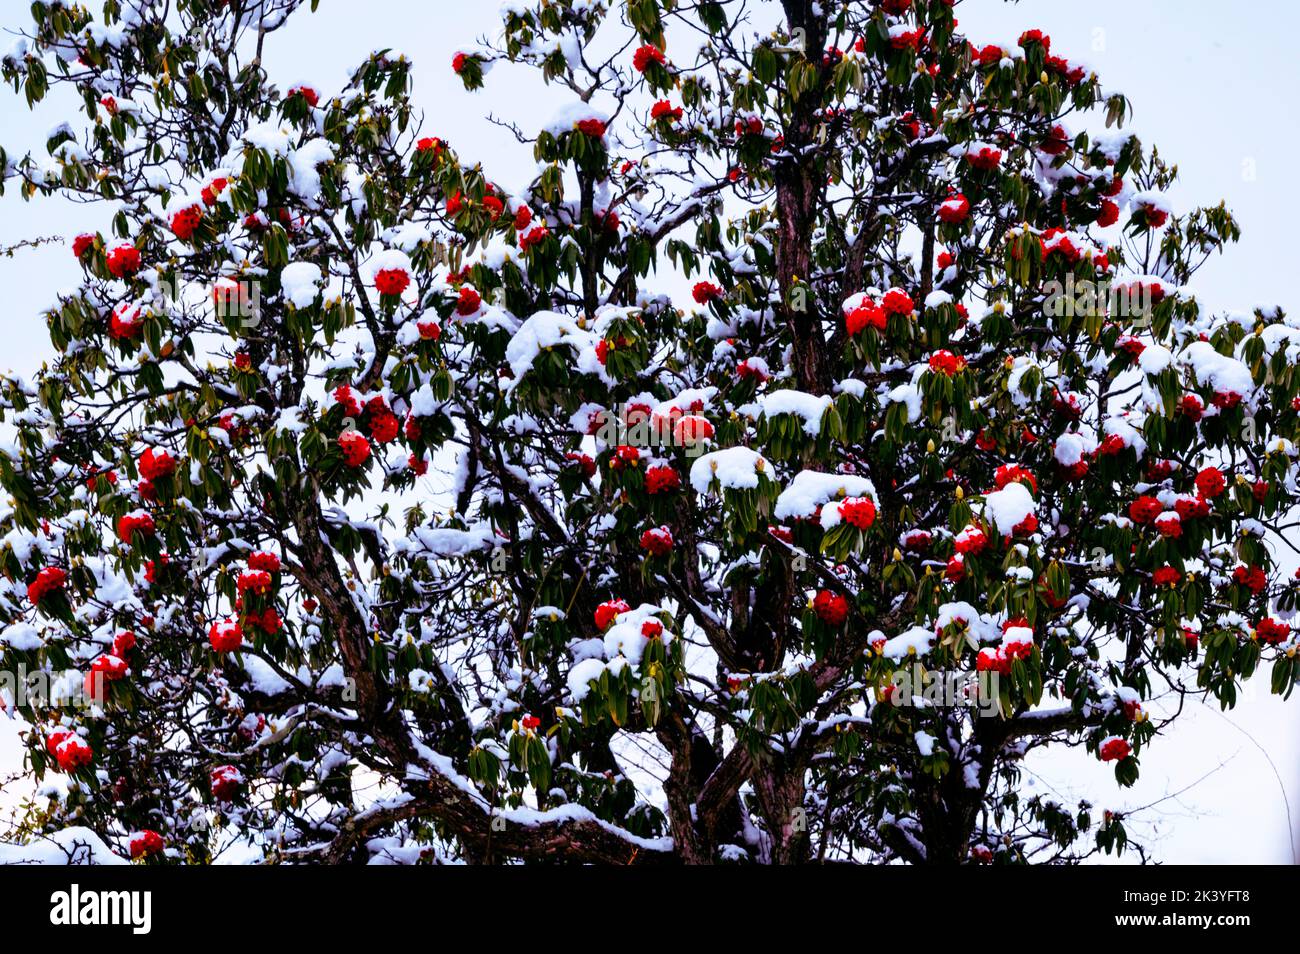 Blossom tree. Rhododendron leaves covered in snow, snow fall in Kumaon region of Himalaya, North India Stock Photo